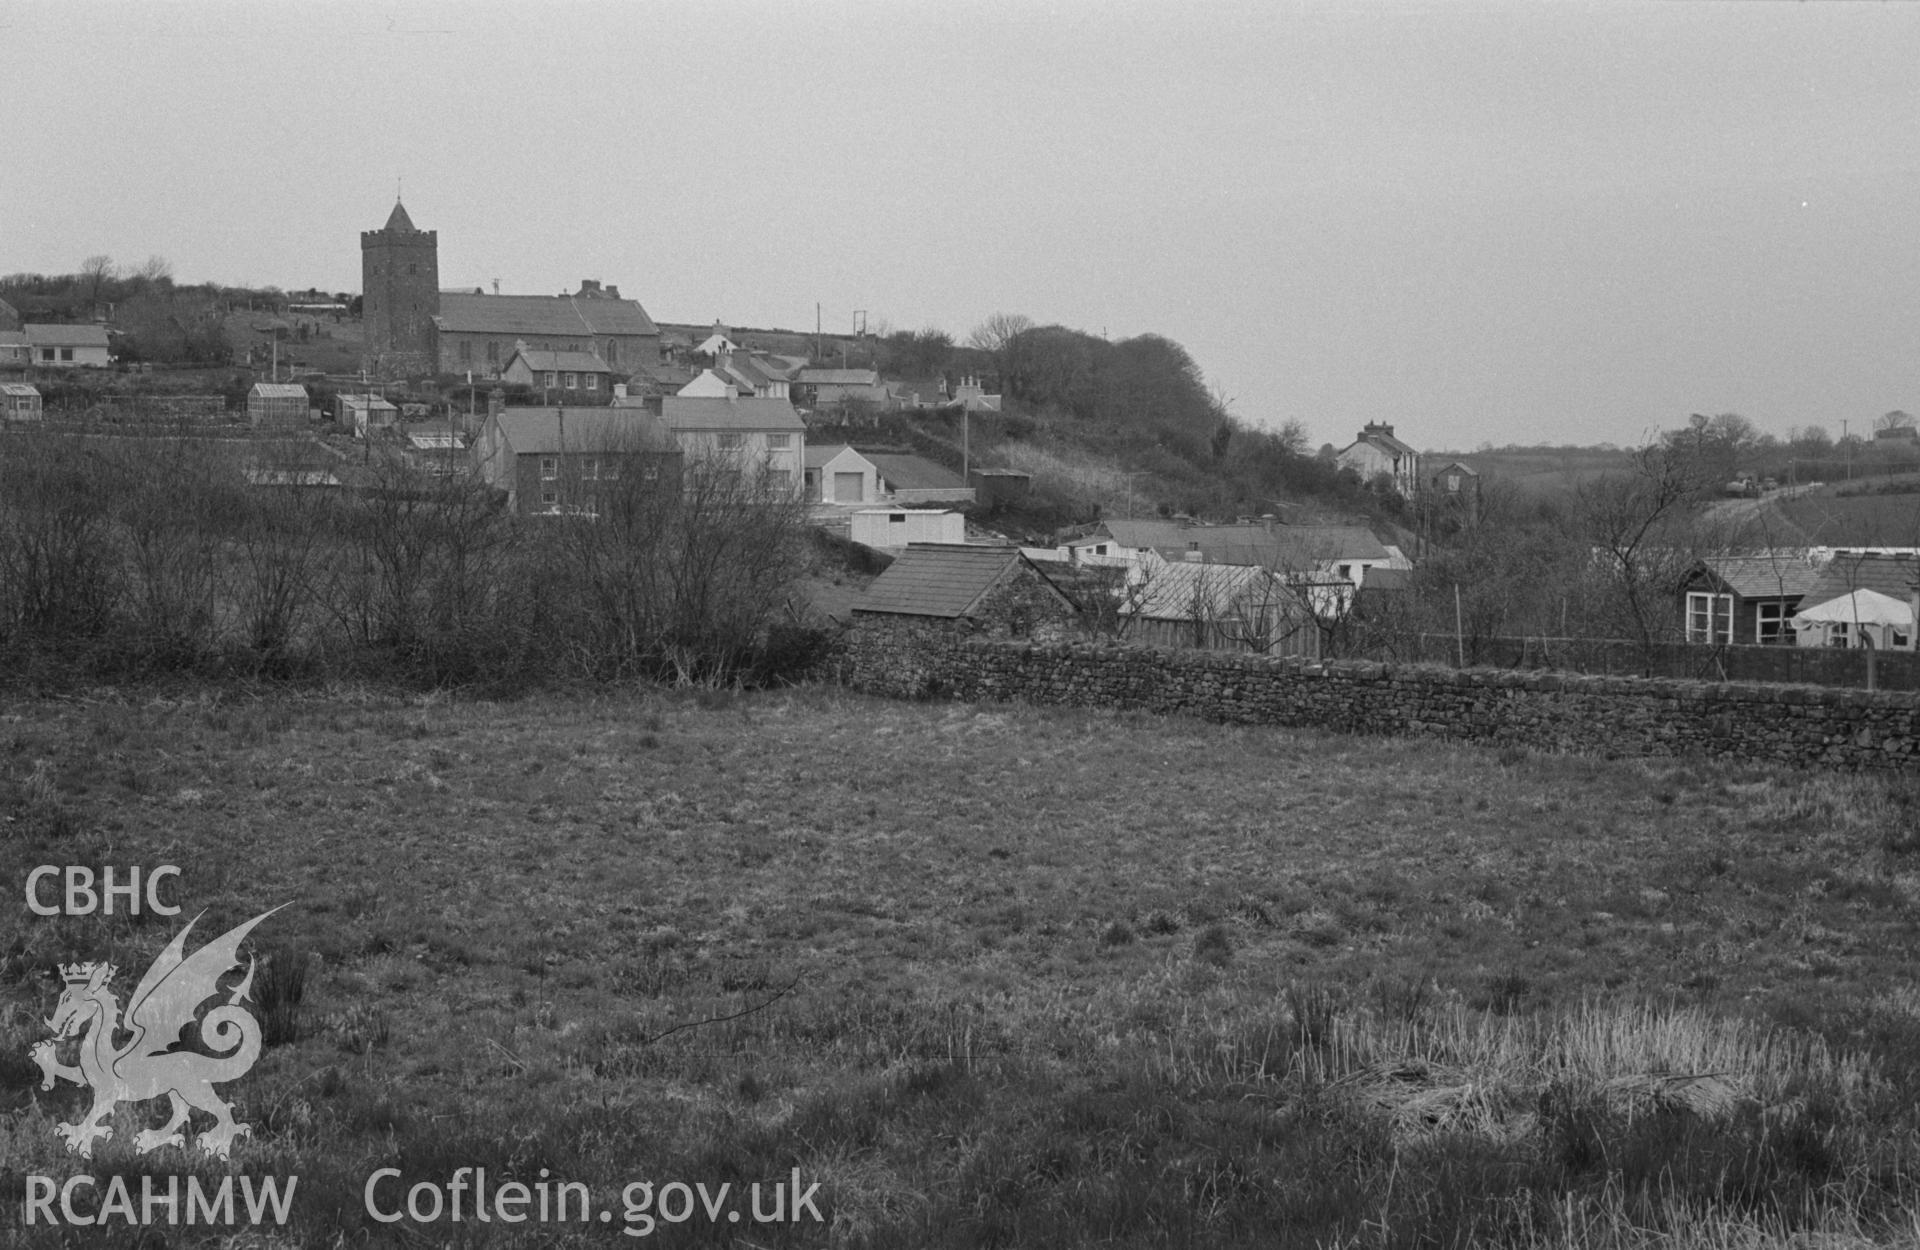 Digital copy of a black and white negative showing view of Llanarth, including St David's church. Photographed by Arthur O. Chater on 13th April 1967 looking north east from just north east of Llanina Arms at Grid Reference SN 422 574.